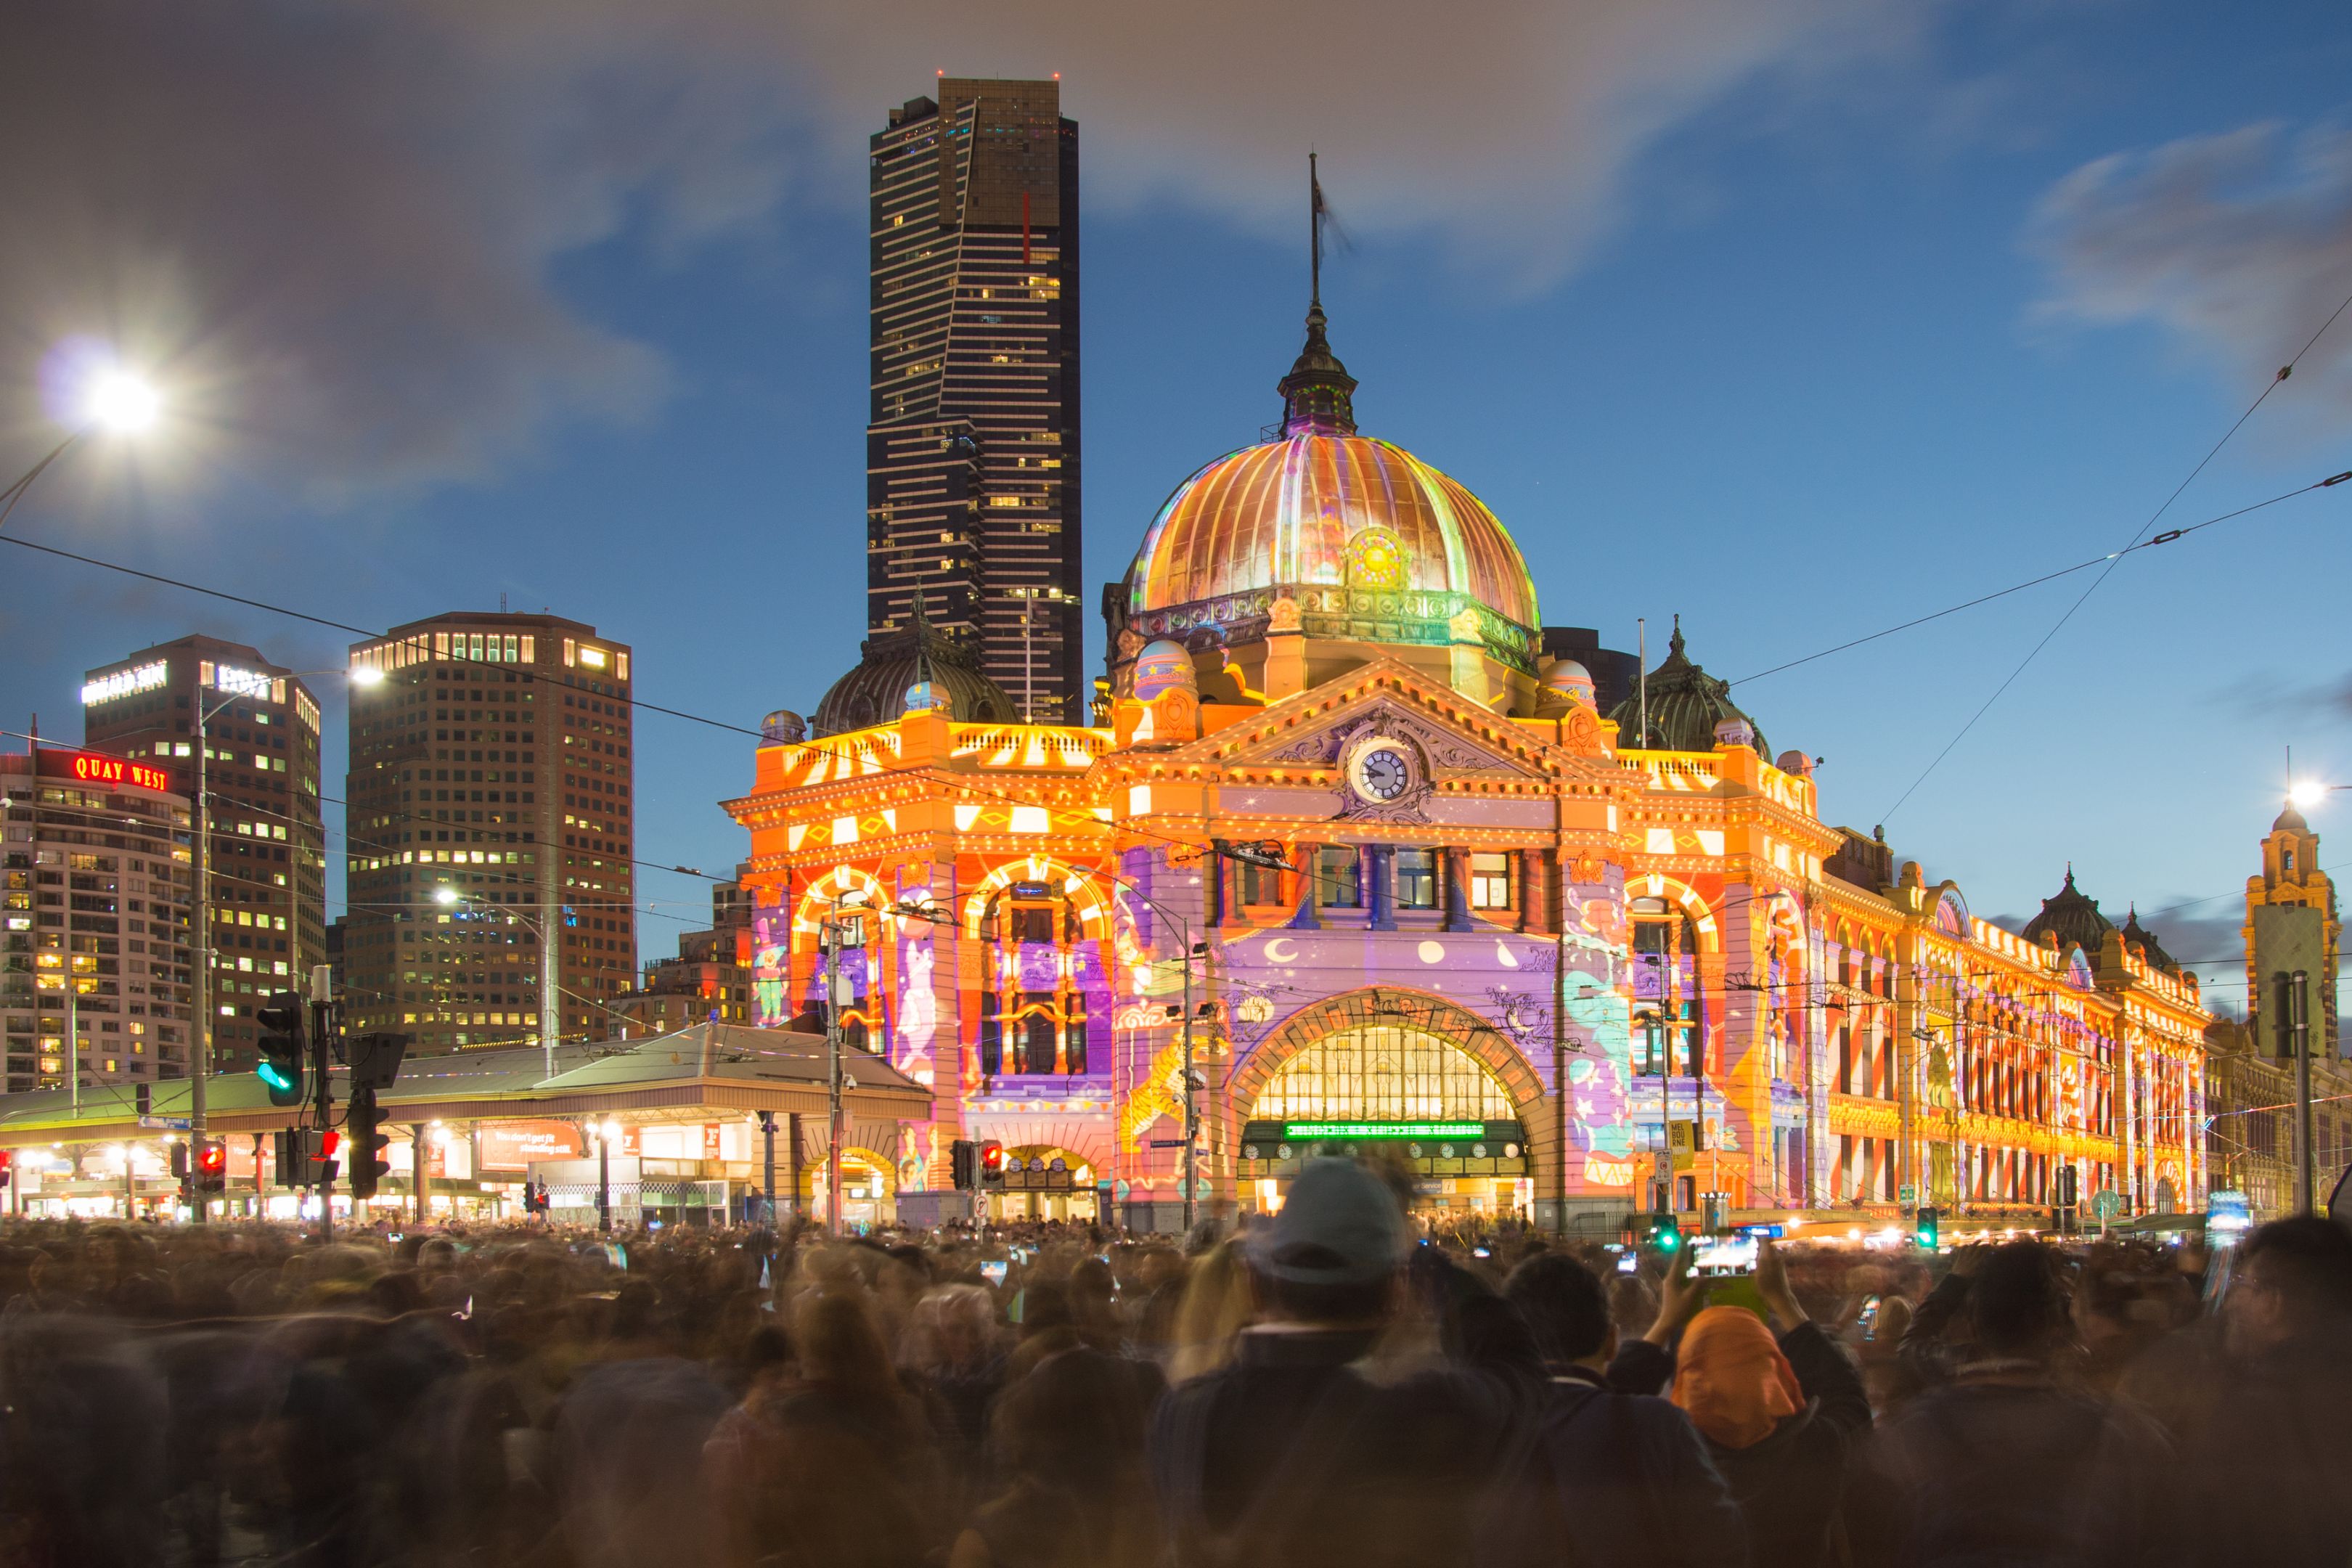 Flinders Street Station in Melbourne during the White Night Festival with large-scale artistic light projection.